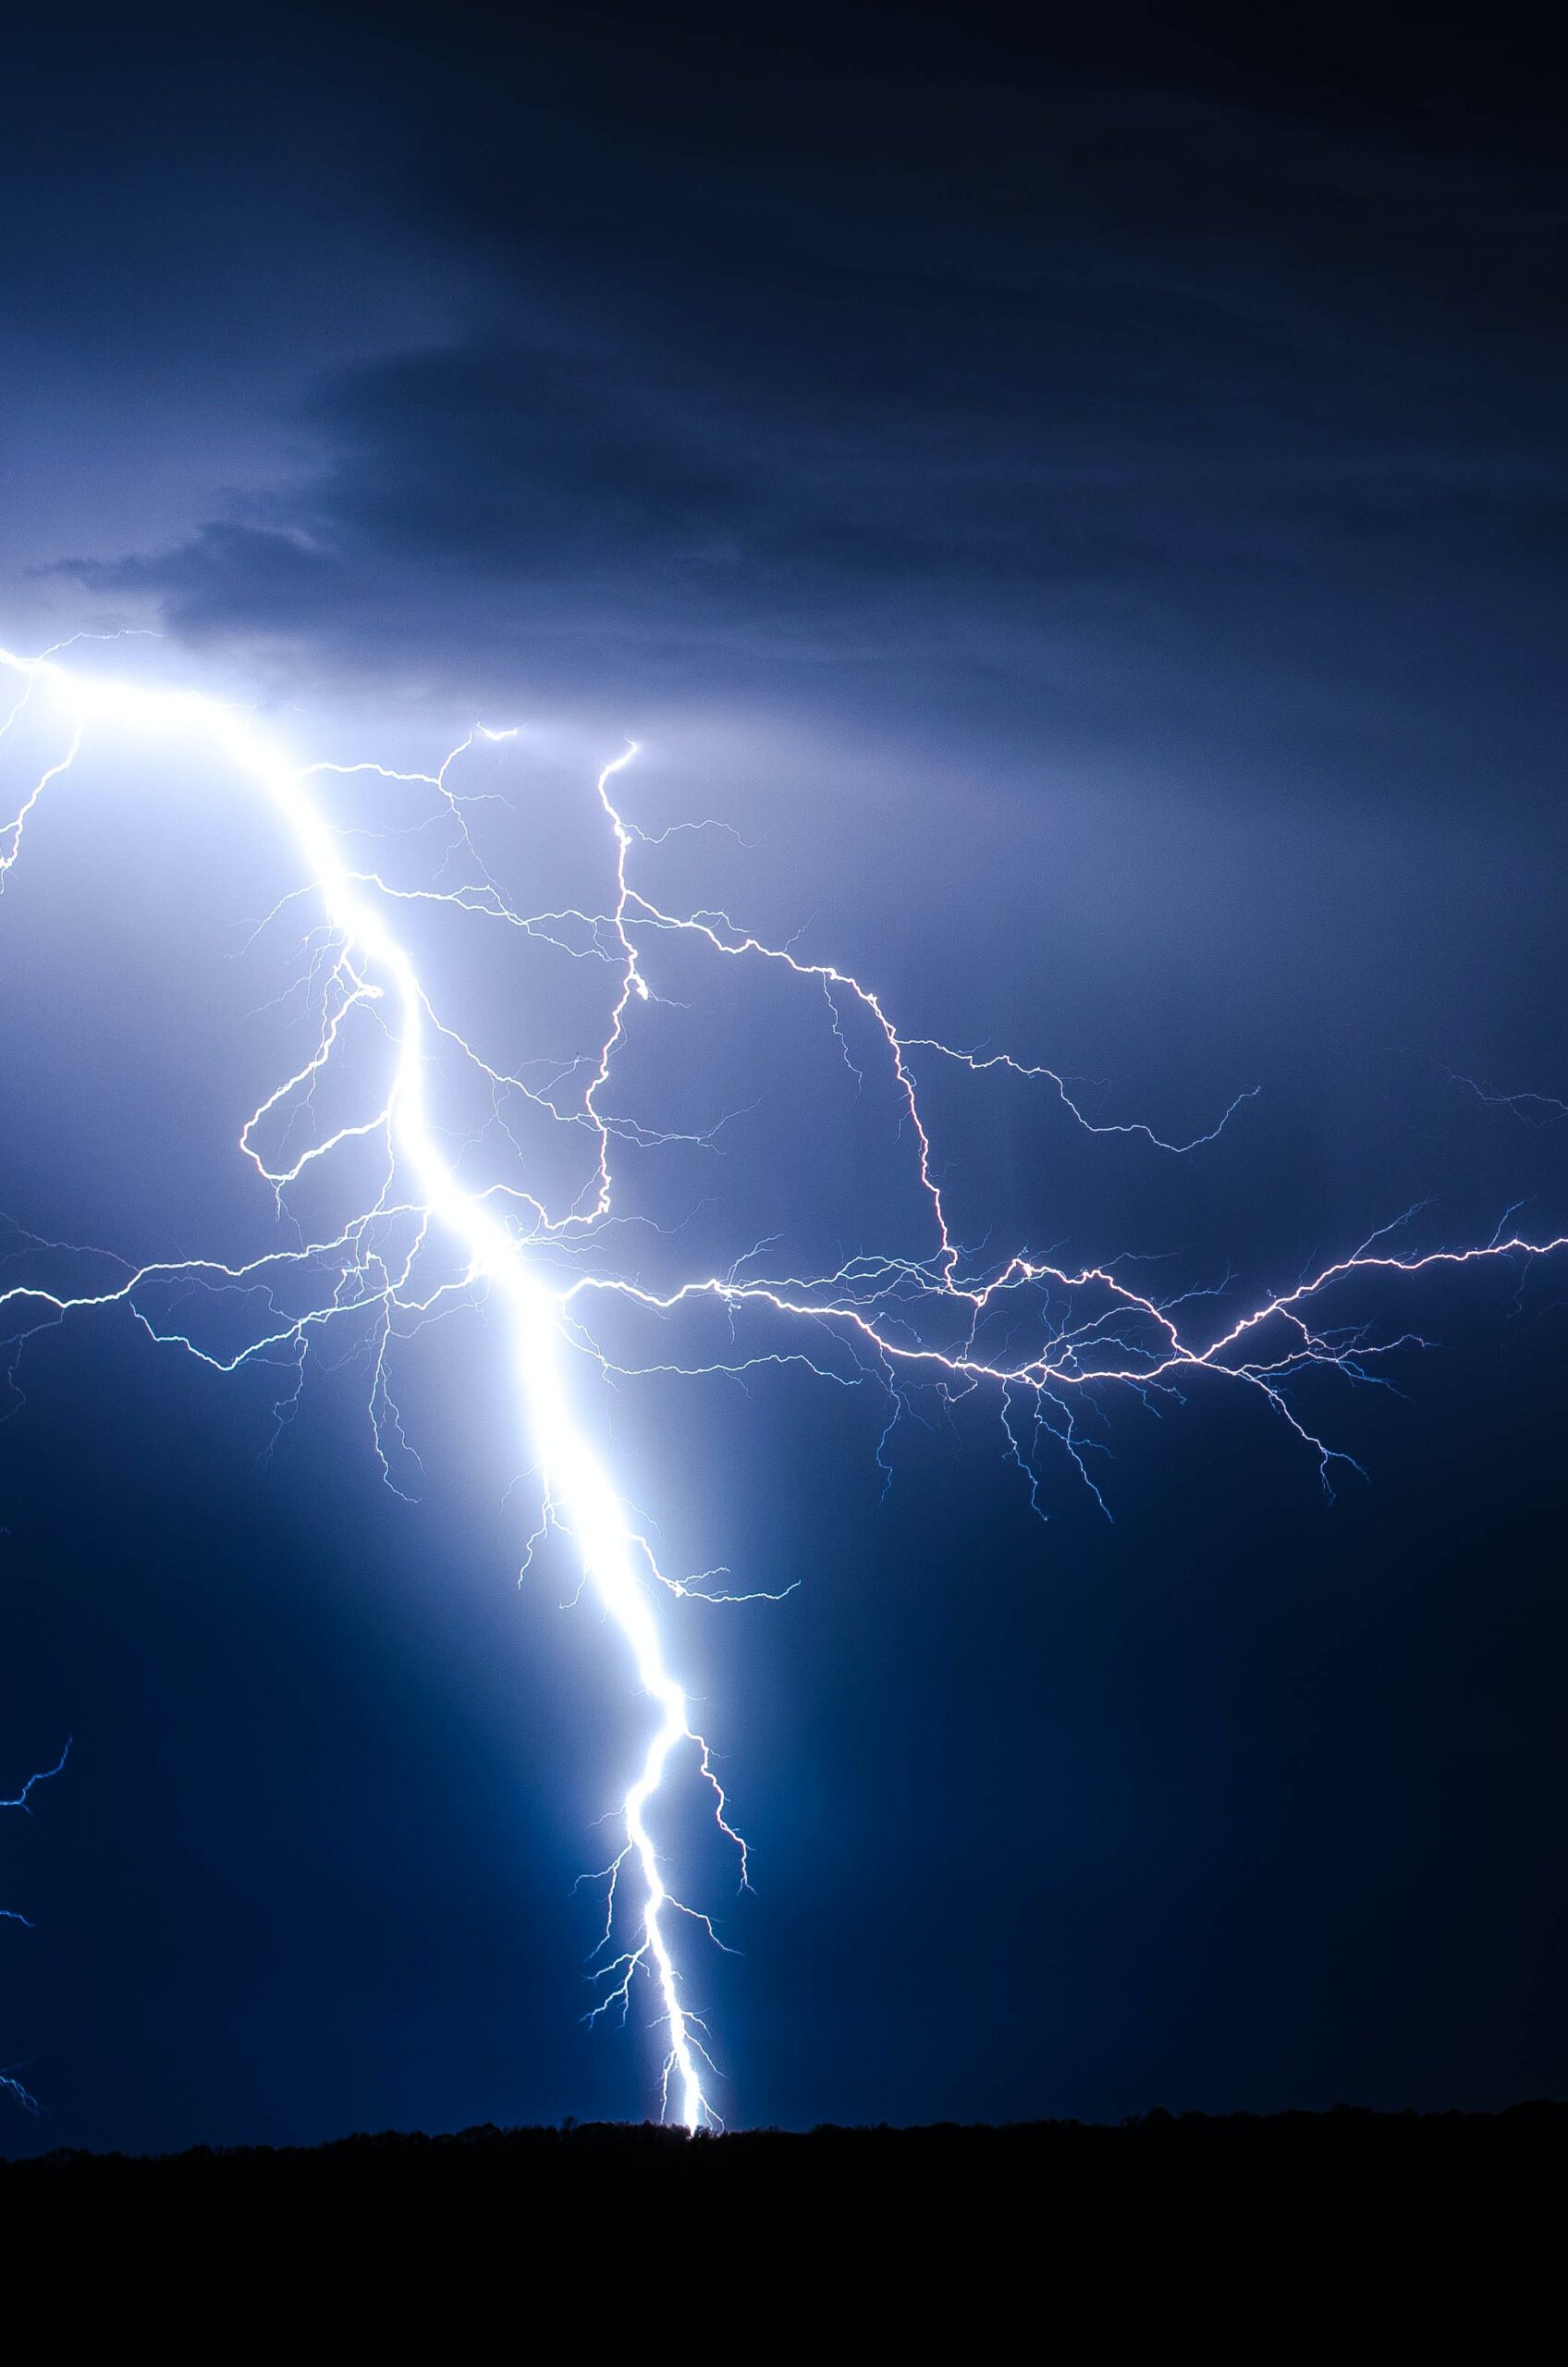 Lightning Can Ruin Your Home HVAC System. Luckily We have HVAC Surge Protectors to keep your home and family safe.